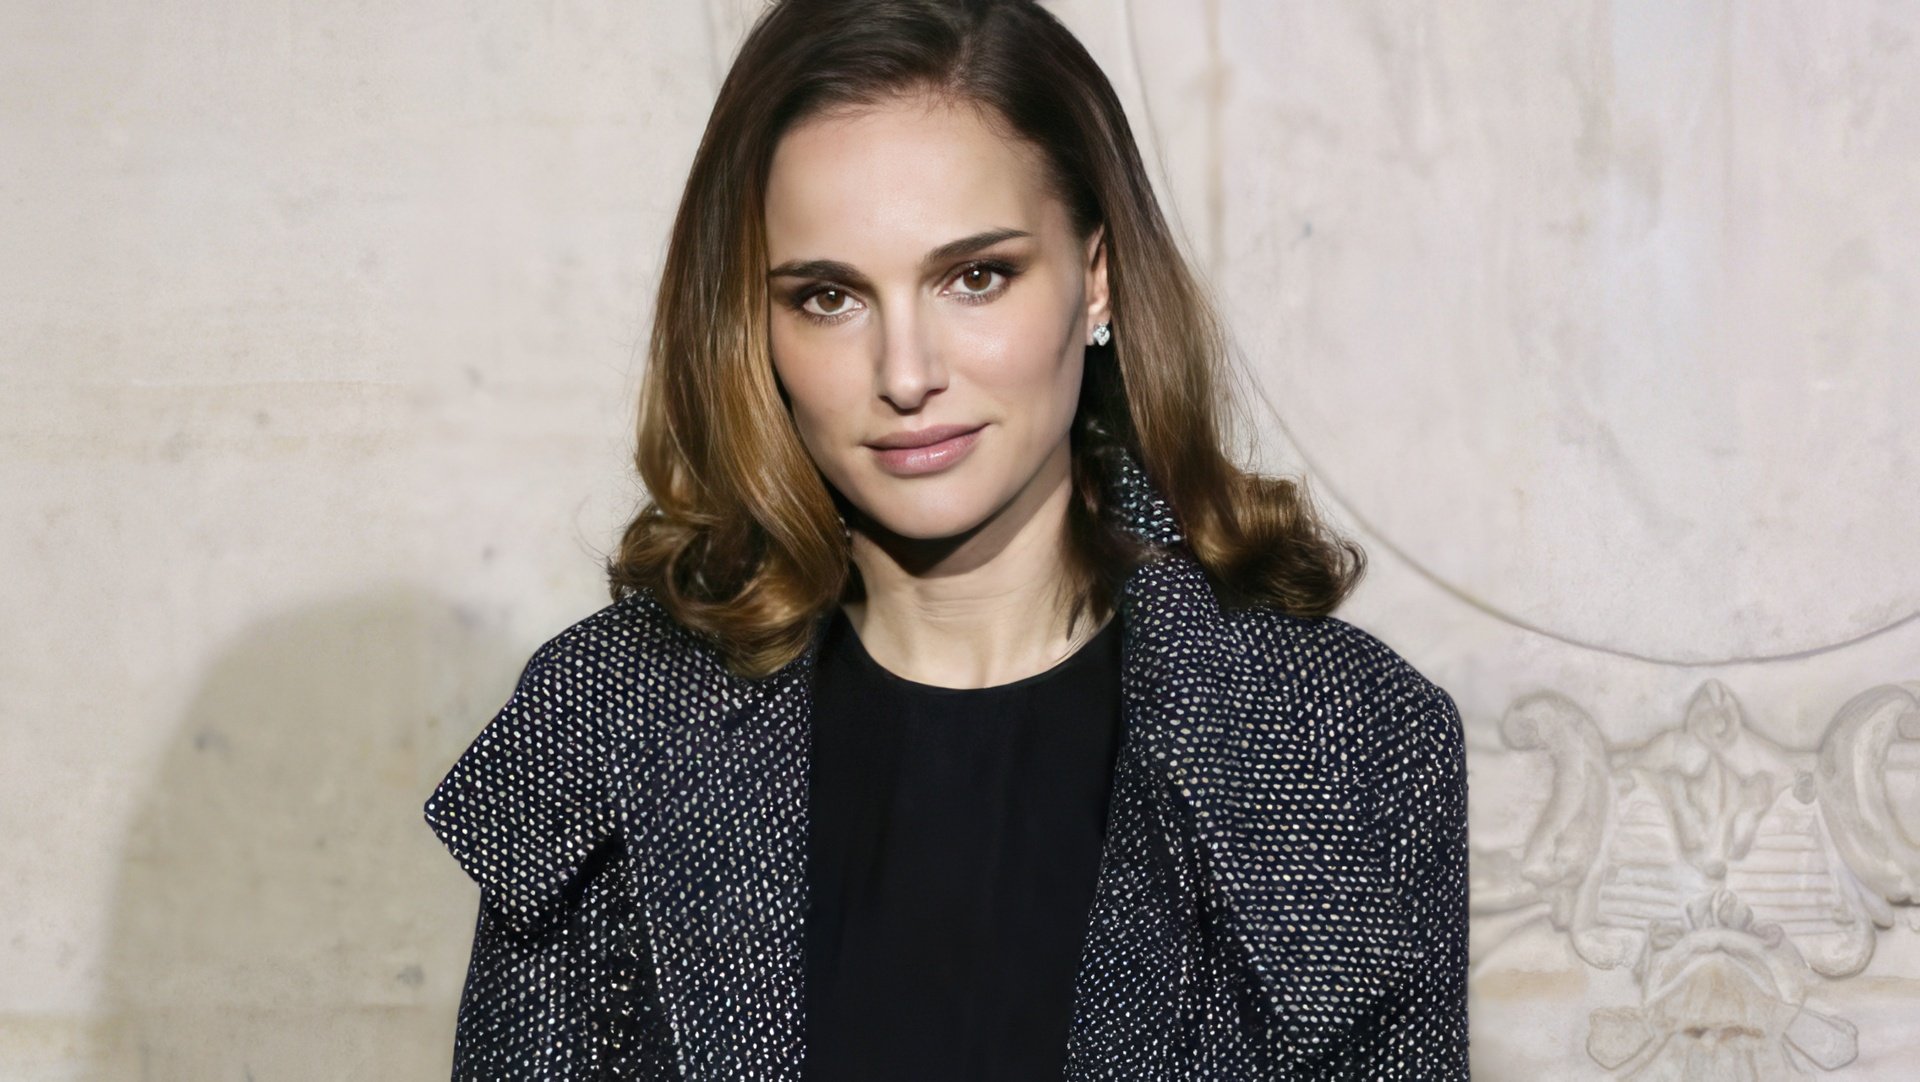 With age, Natalie Portman becomes only more feminine